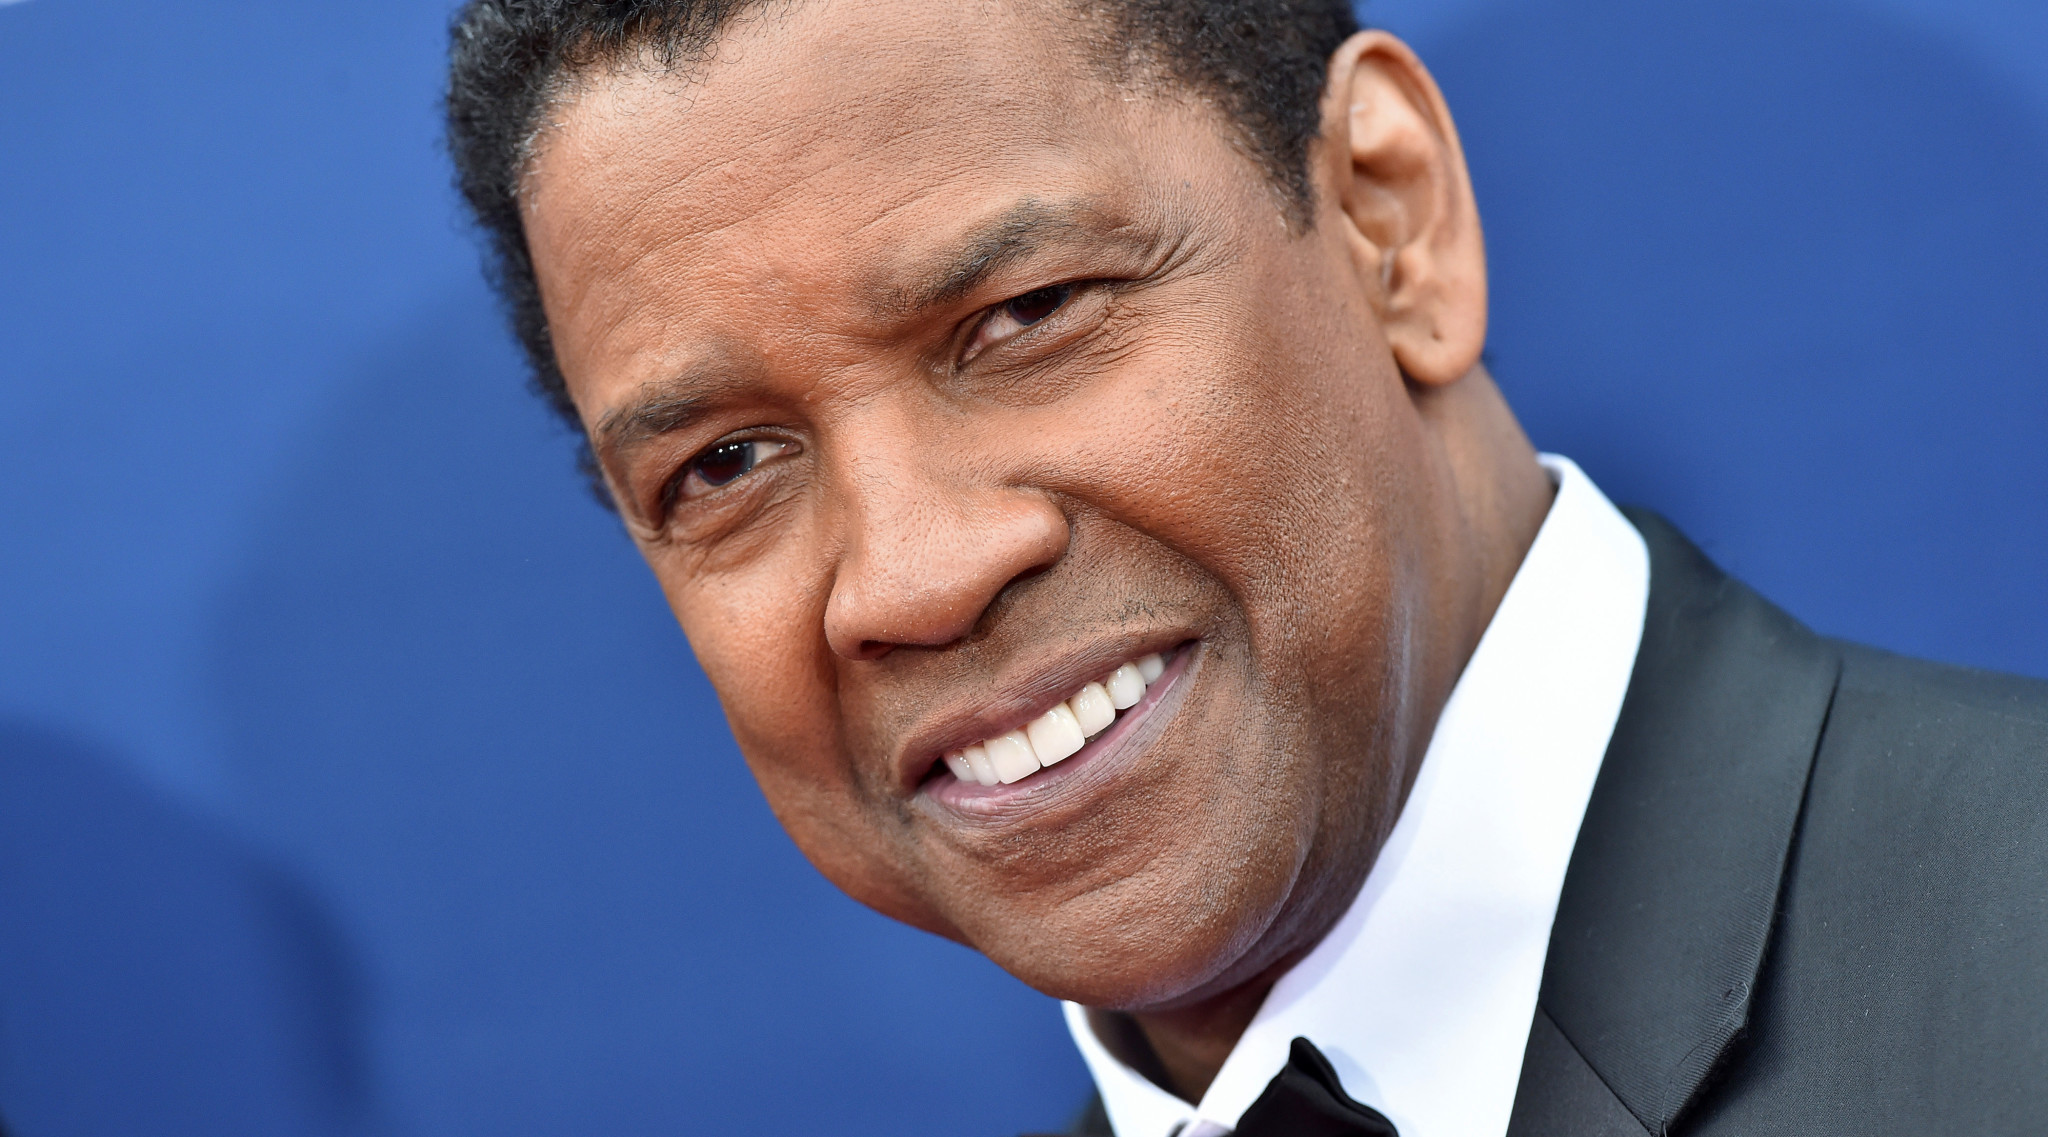 Denzel Washington Extends His Own Oscars Record as Most-Nominated Black Actor